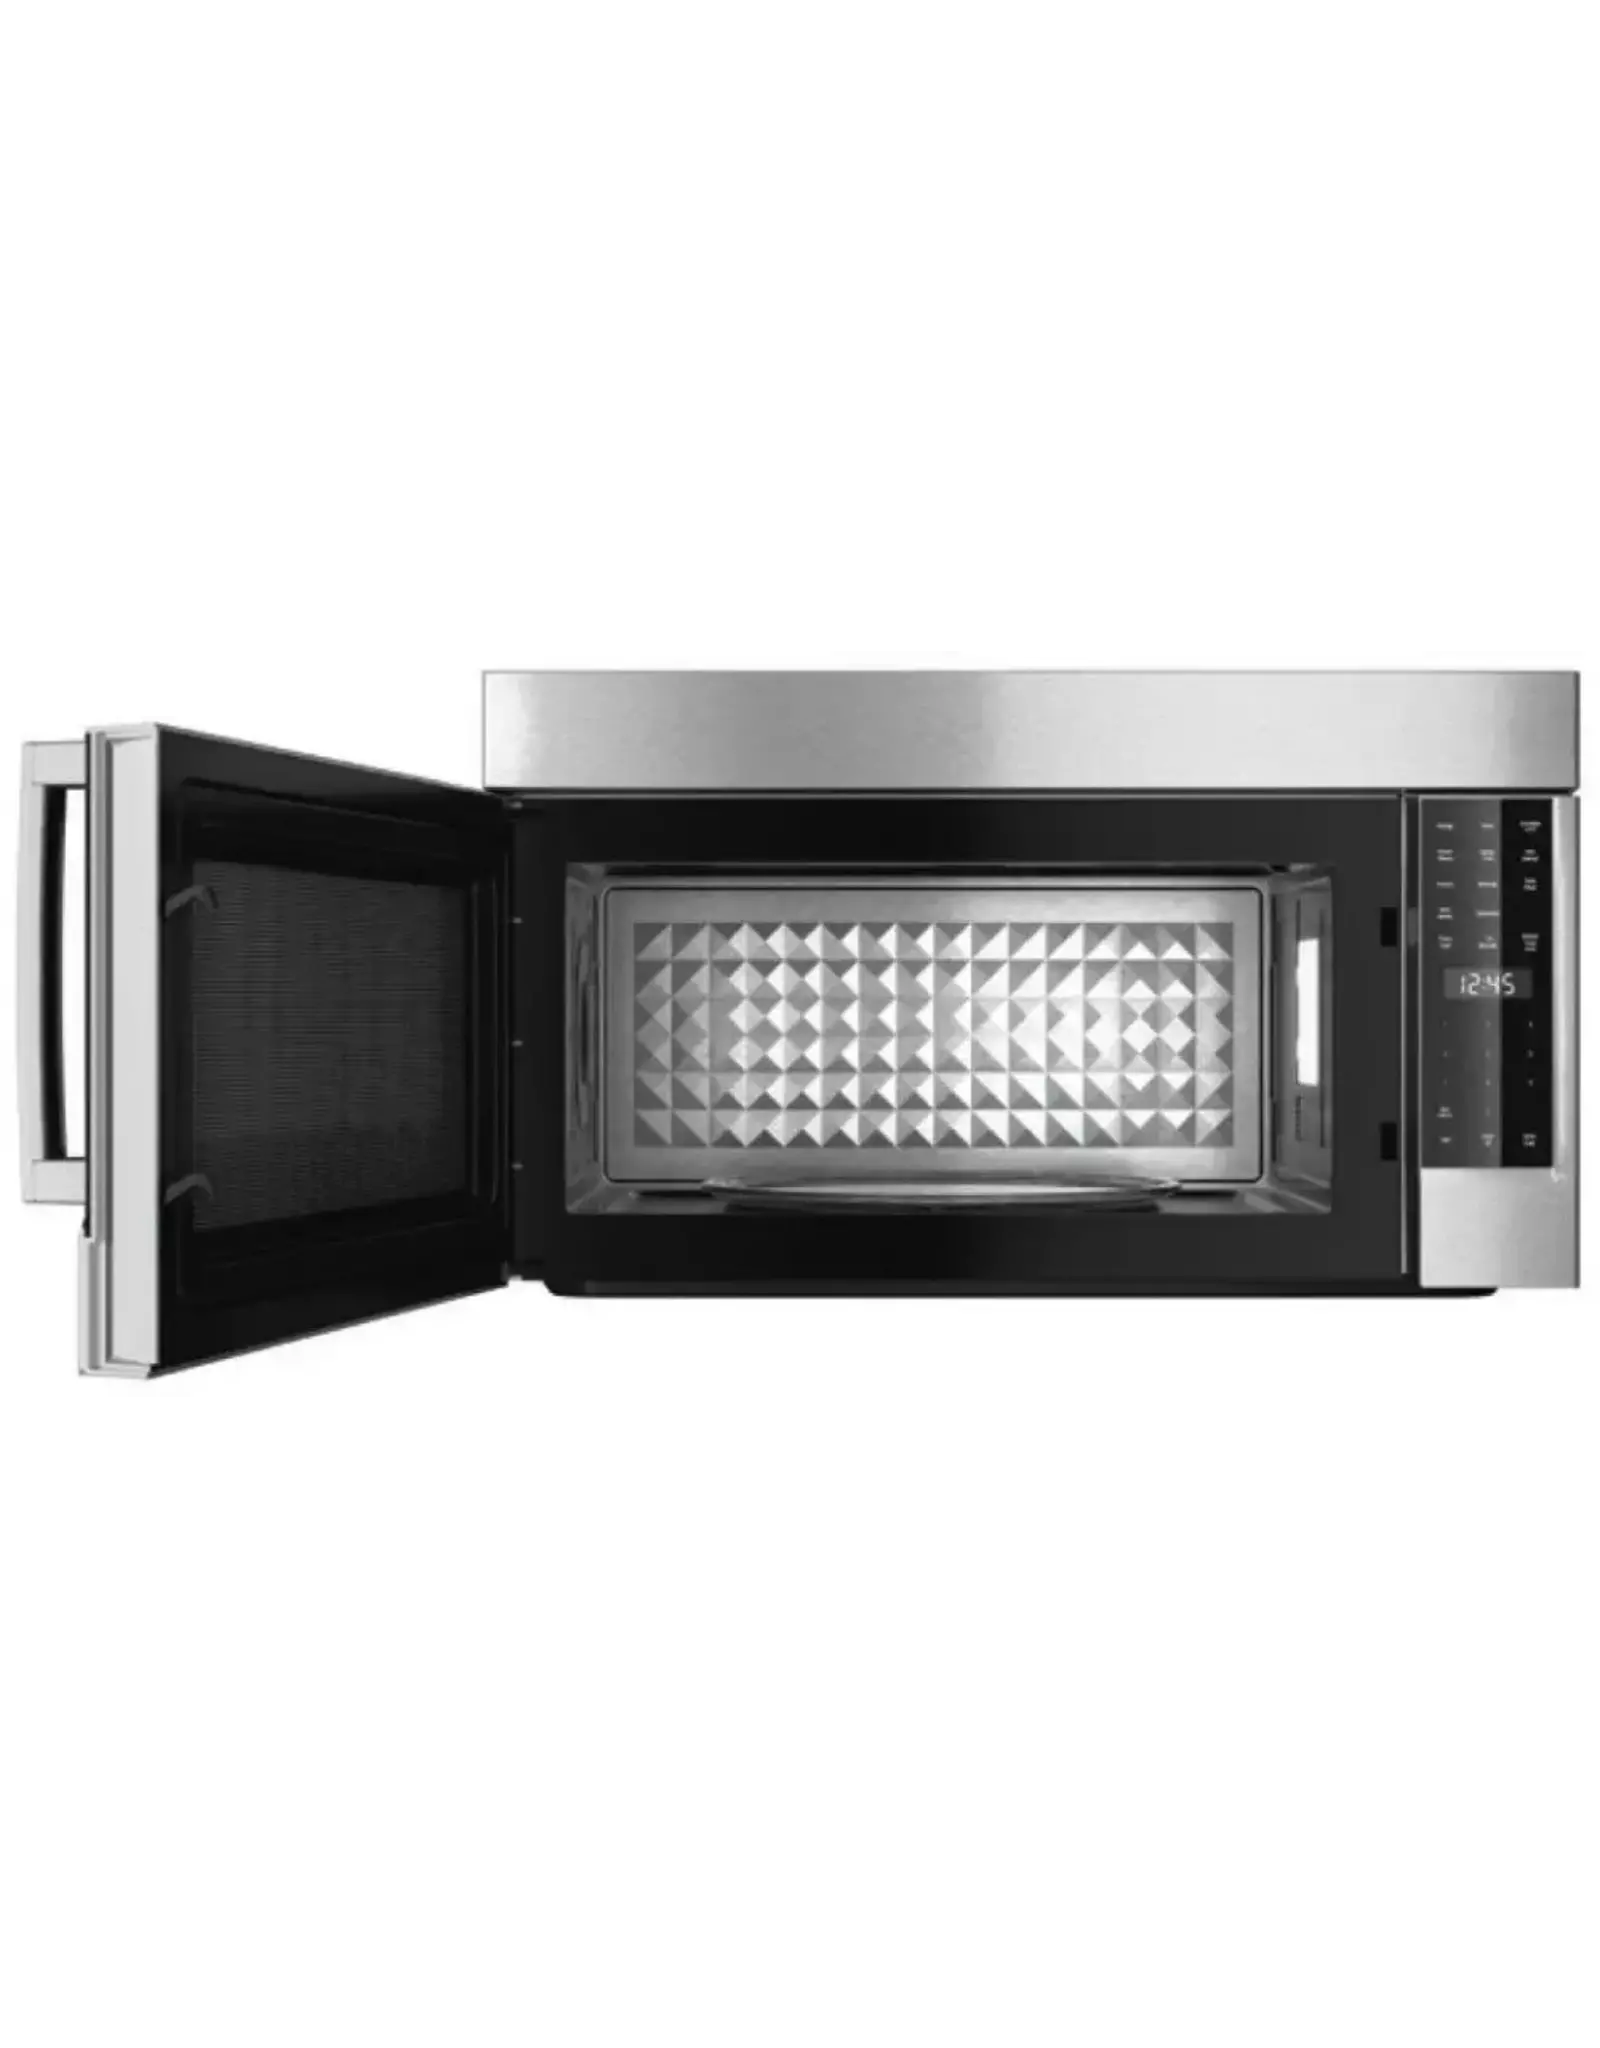 BOSCH Bosch 800 Series 30 in. 1.8 cu. ft. Over the Range Convection Microwave in Stainless Steel